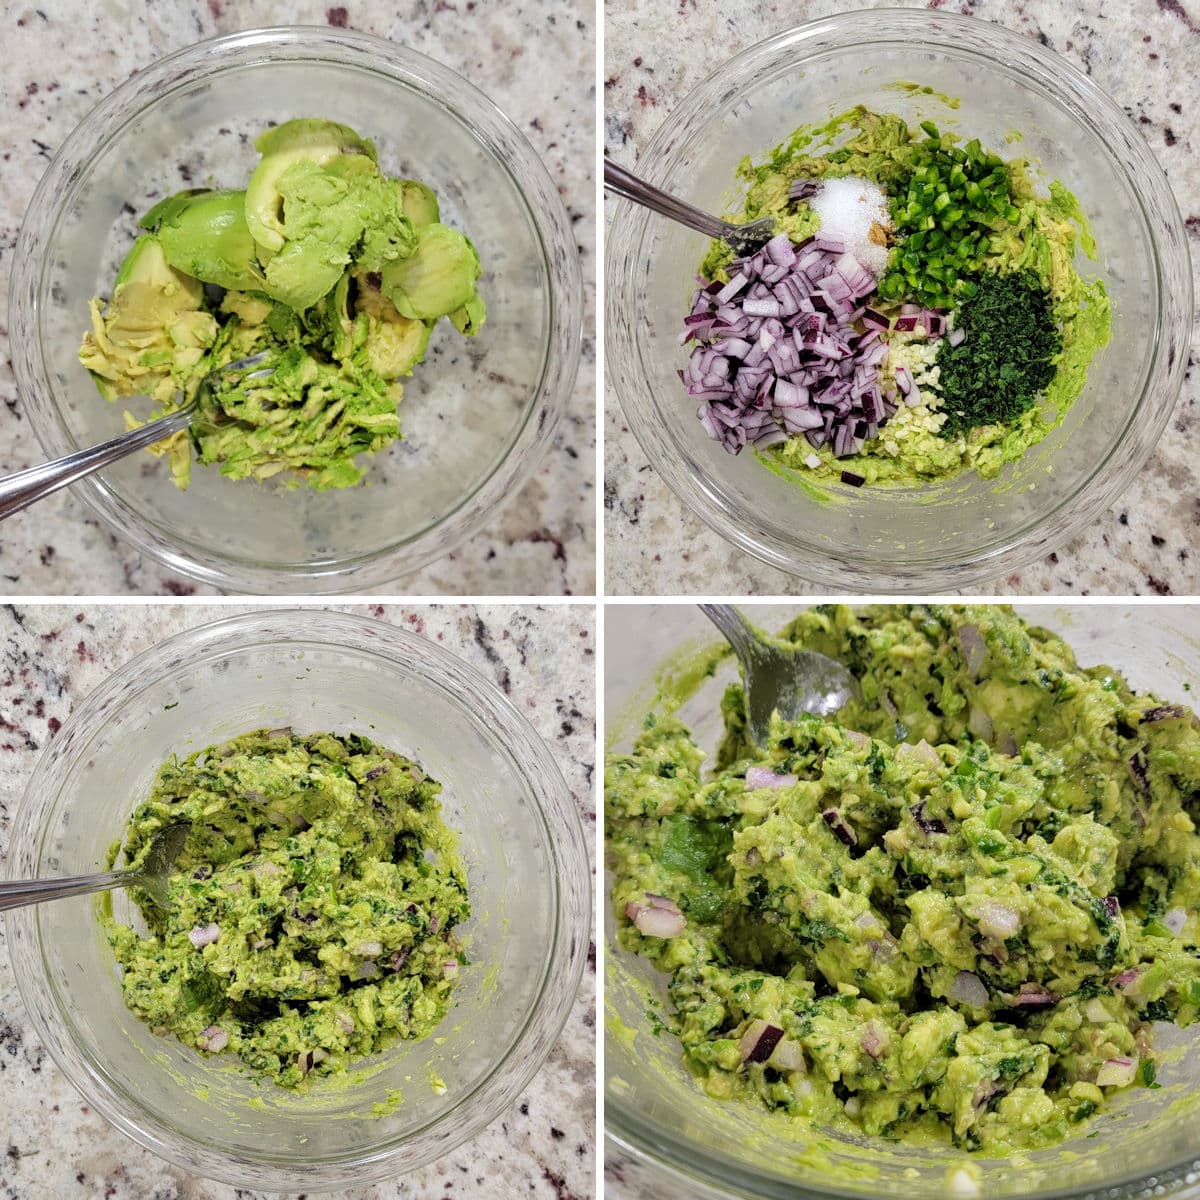 Mixing guacamole ingredients in a glass bowl.